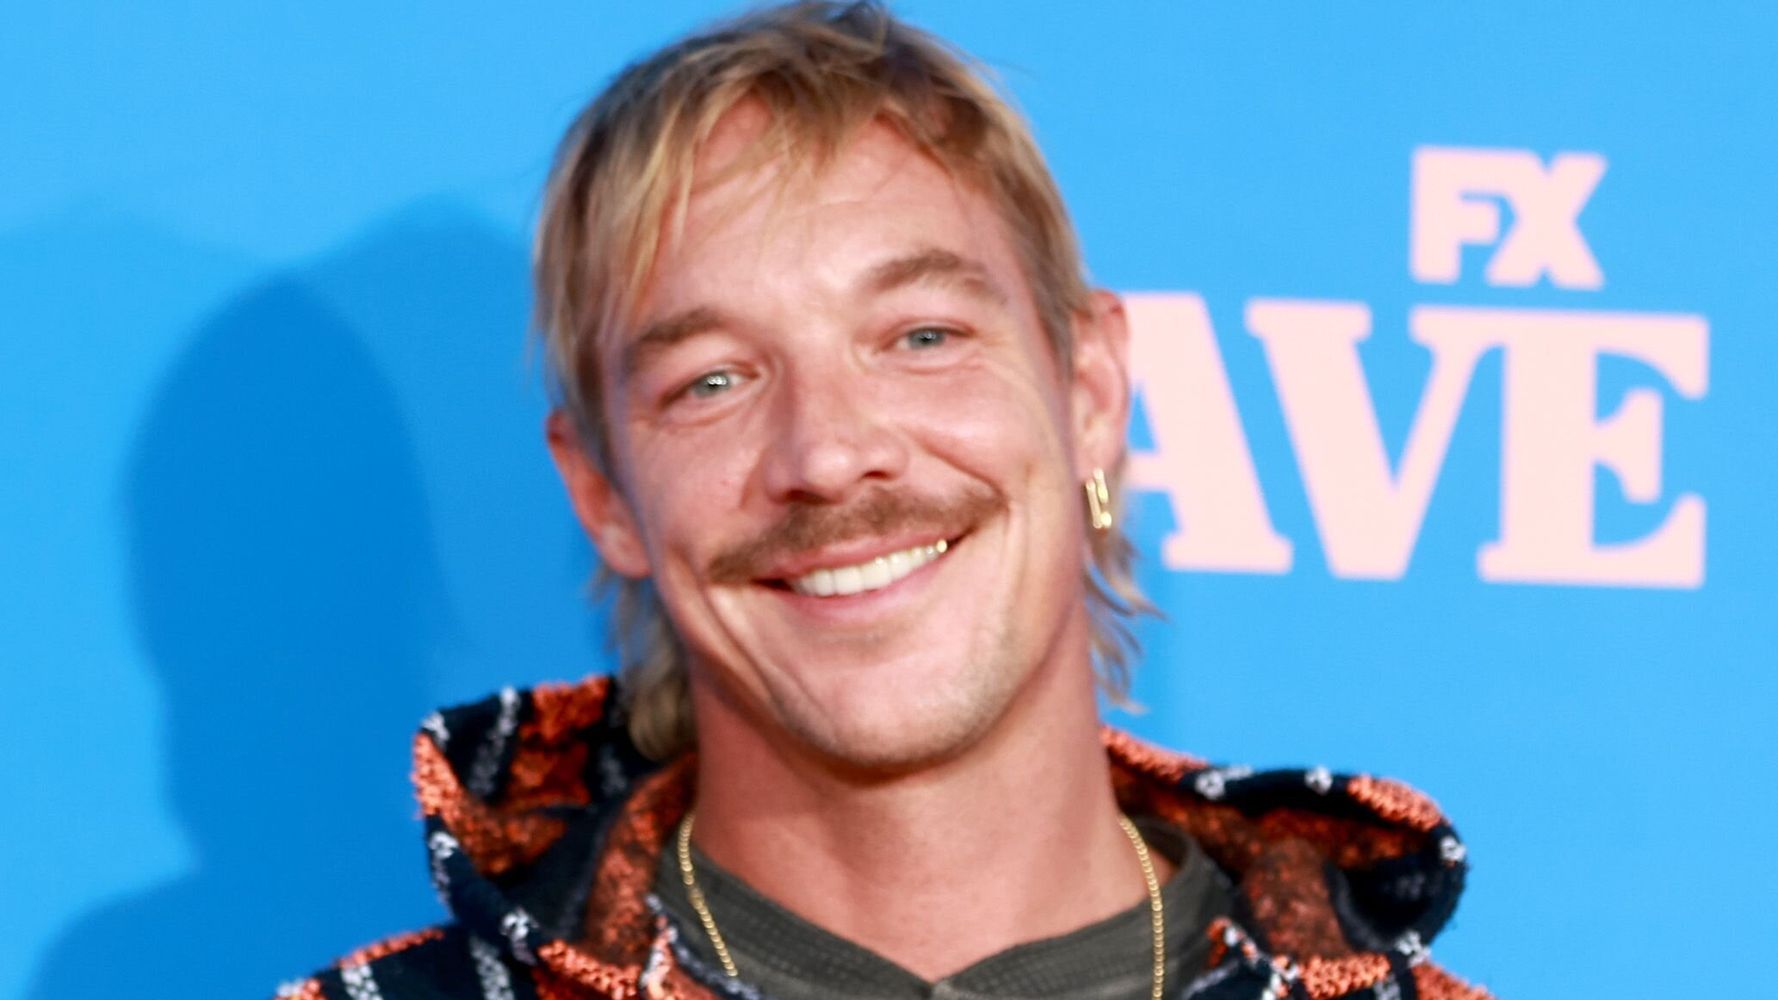 DJ Diplo Could Face Criminal Charges Over Sexual Misconduct Accusations